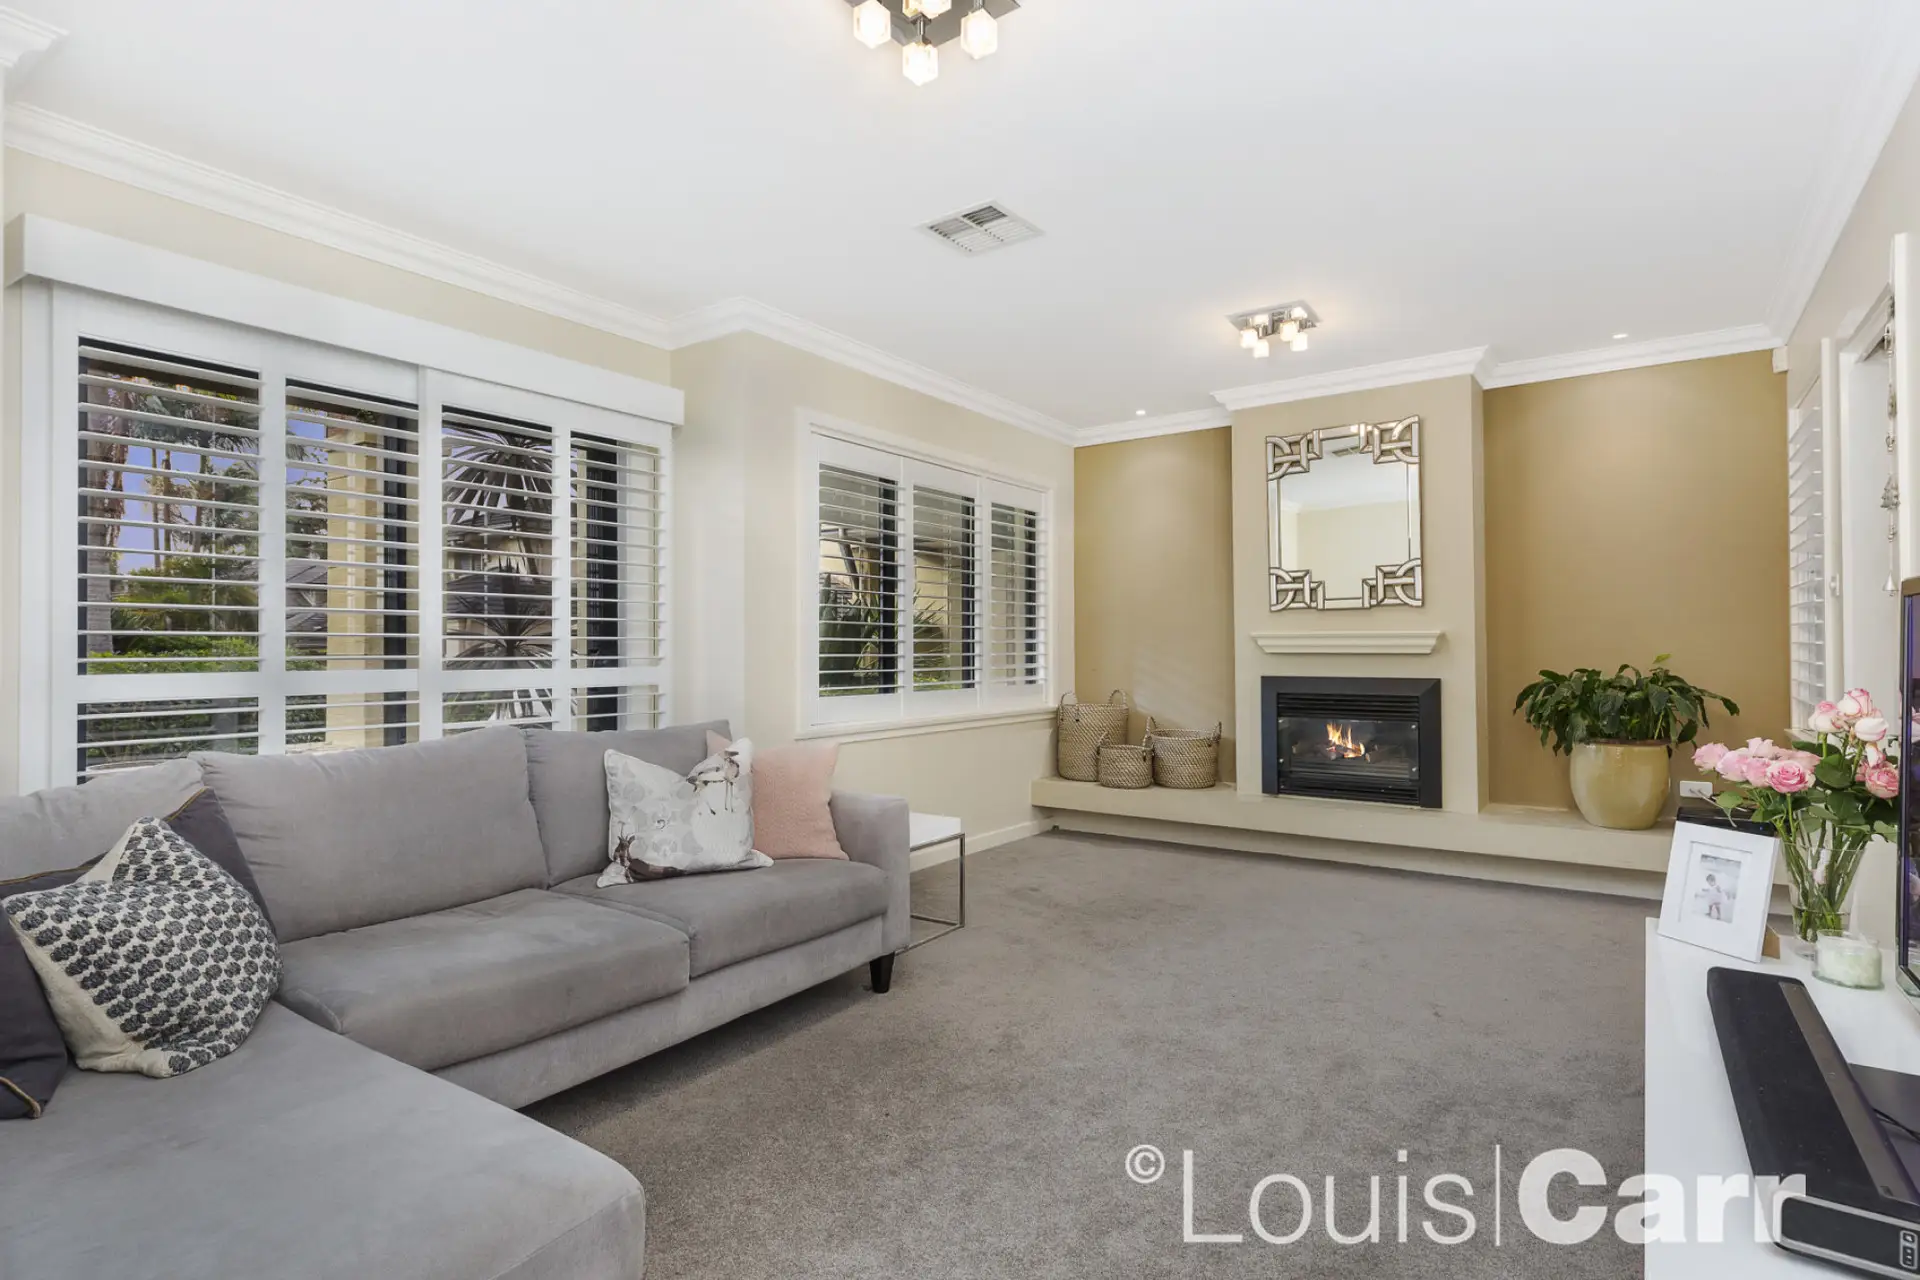 Photo #2: 16 Oliver Way, Cherrybrook - Sold by Louis Carr Real Estate